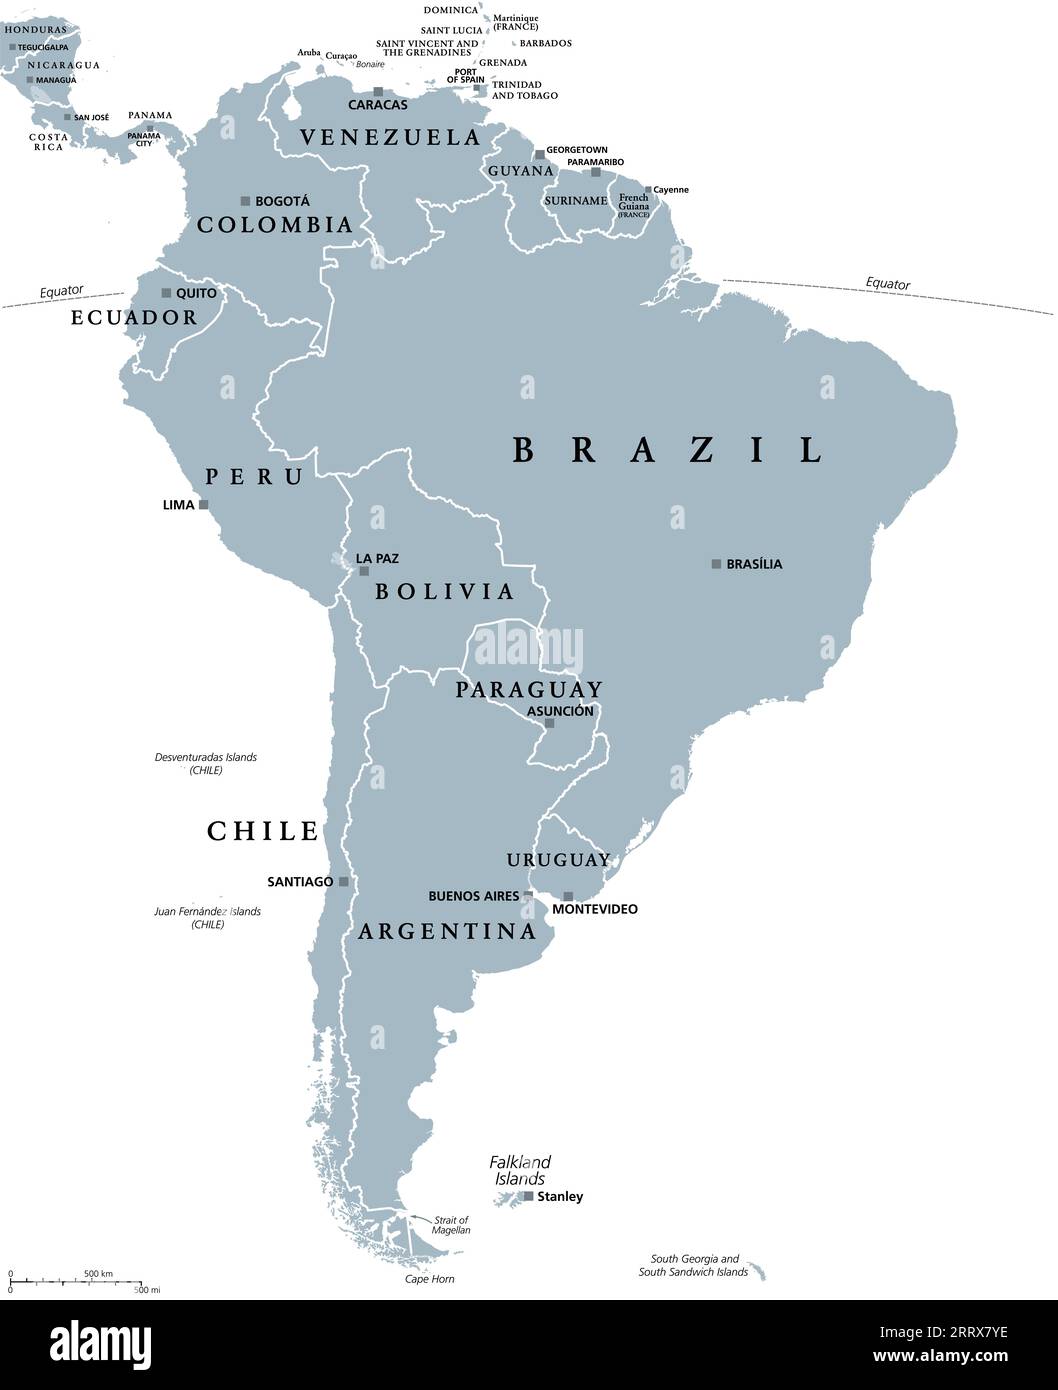 South America, gray political map with international borders and capitals. A continent, bordered by the Pacific and Atlantic Ocean, North America etc. Stock Photo